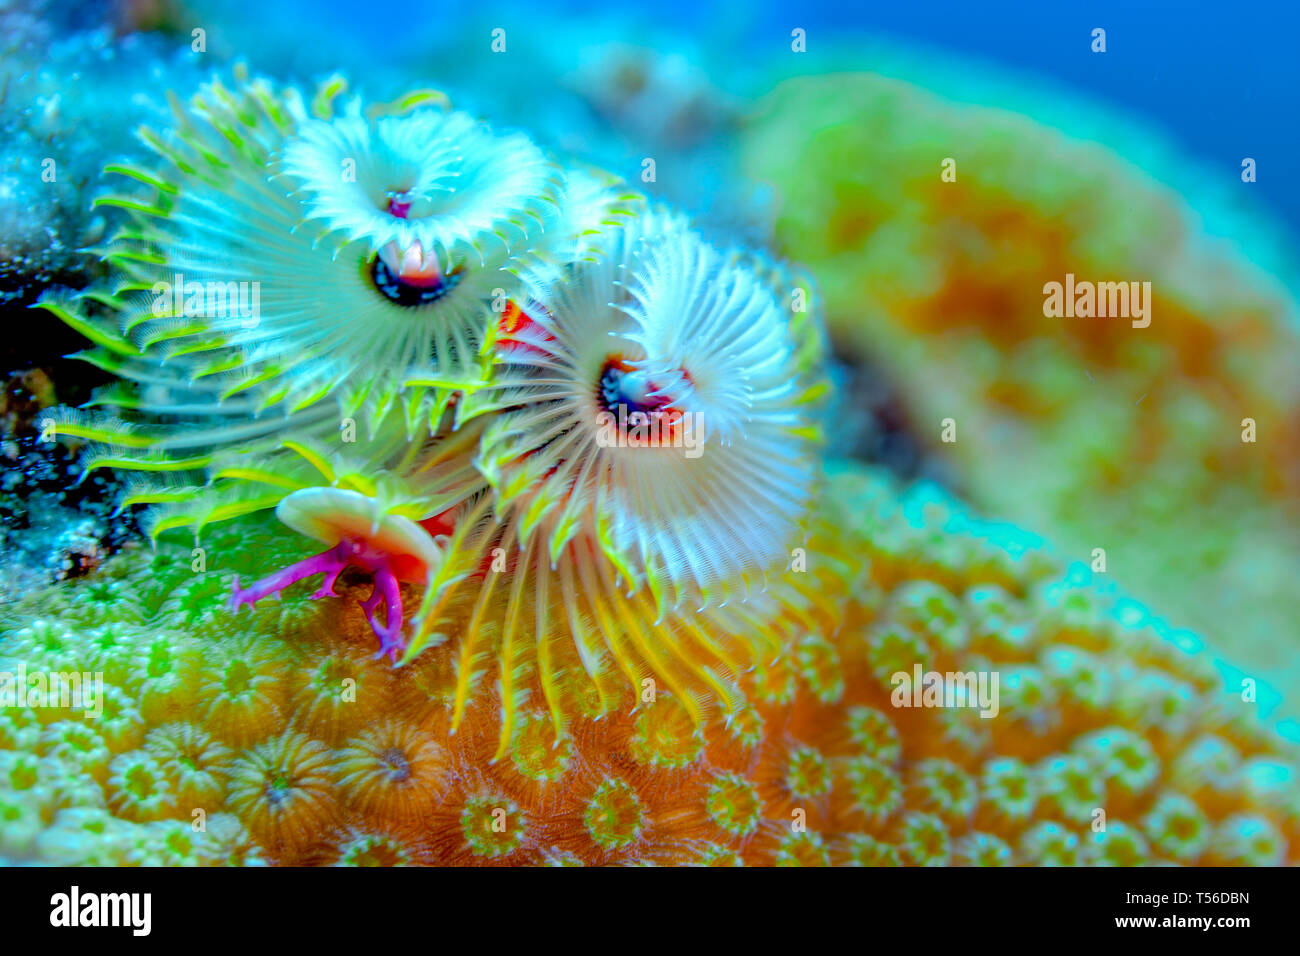 Christmas Tree Worms embedded in the coral, Turks and Caicos Islands. Stock Photo